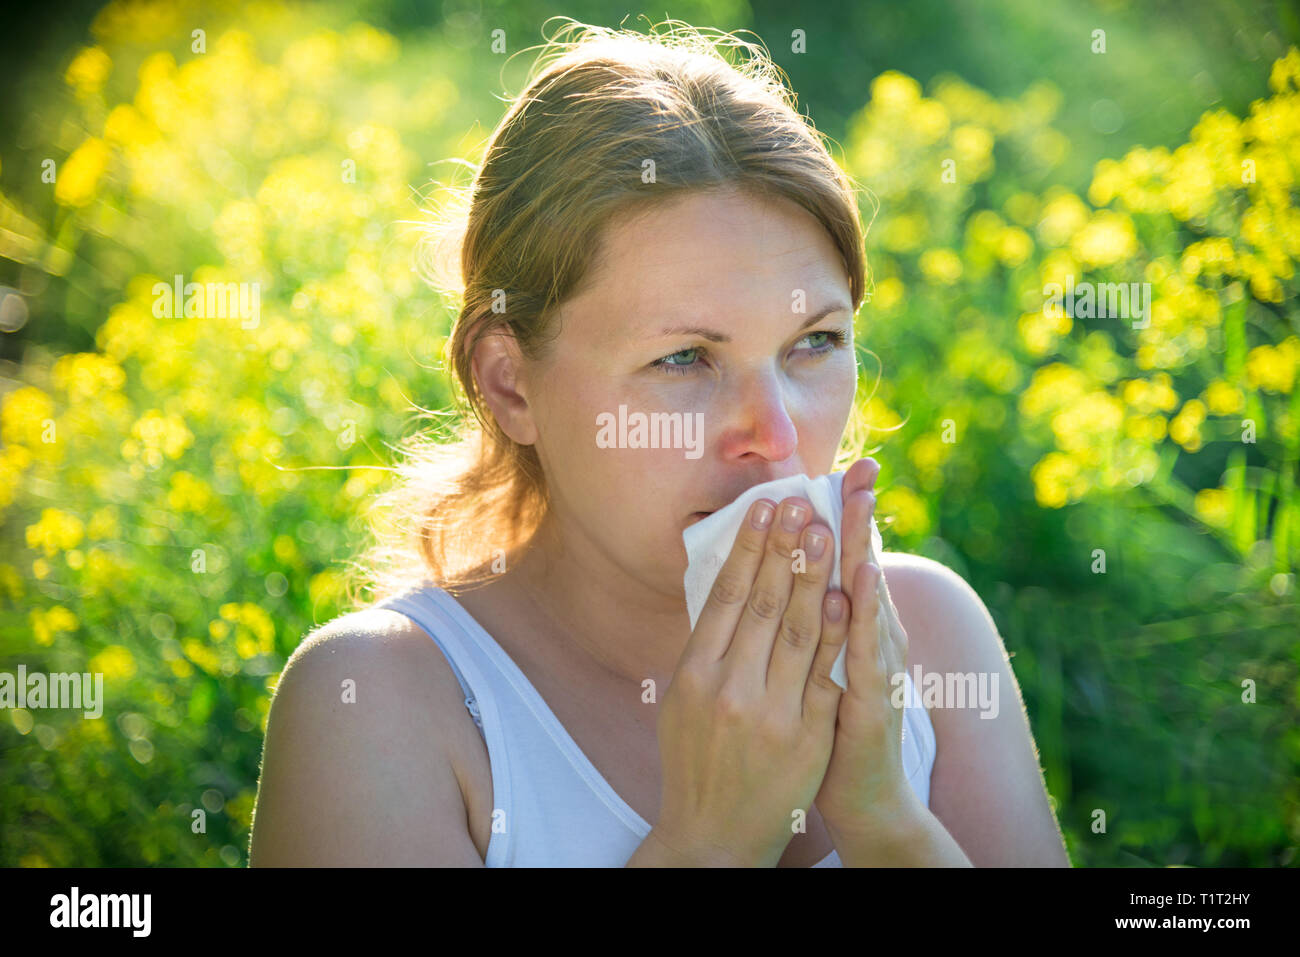 woman suffering from pollen allergy Stock Photo